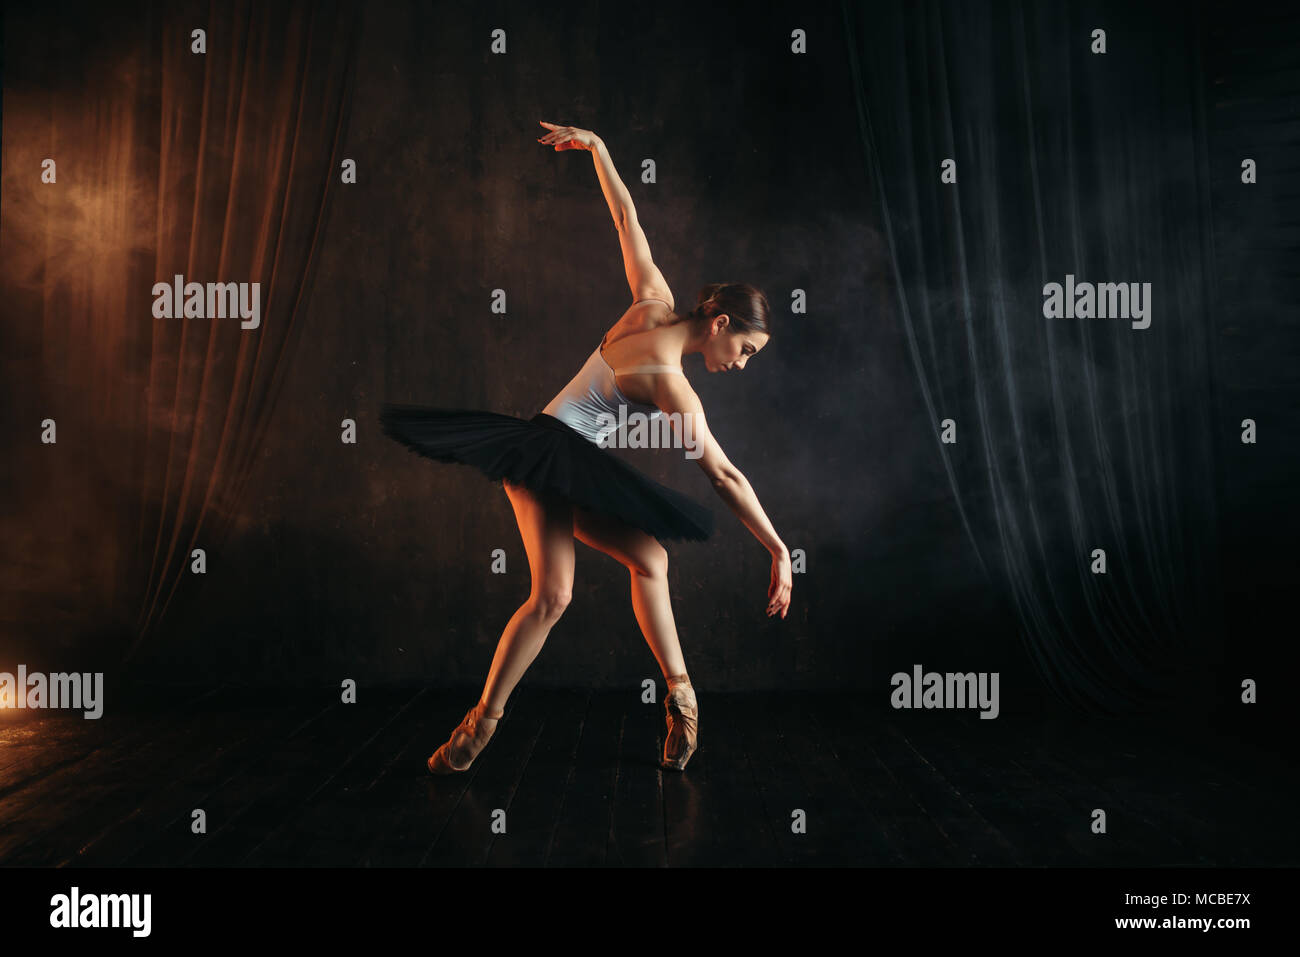 Elegance ballerina in action on theatrical stage Stock Photo